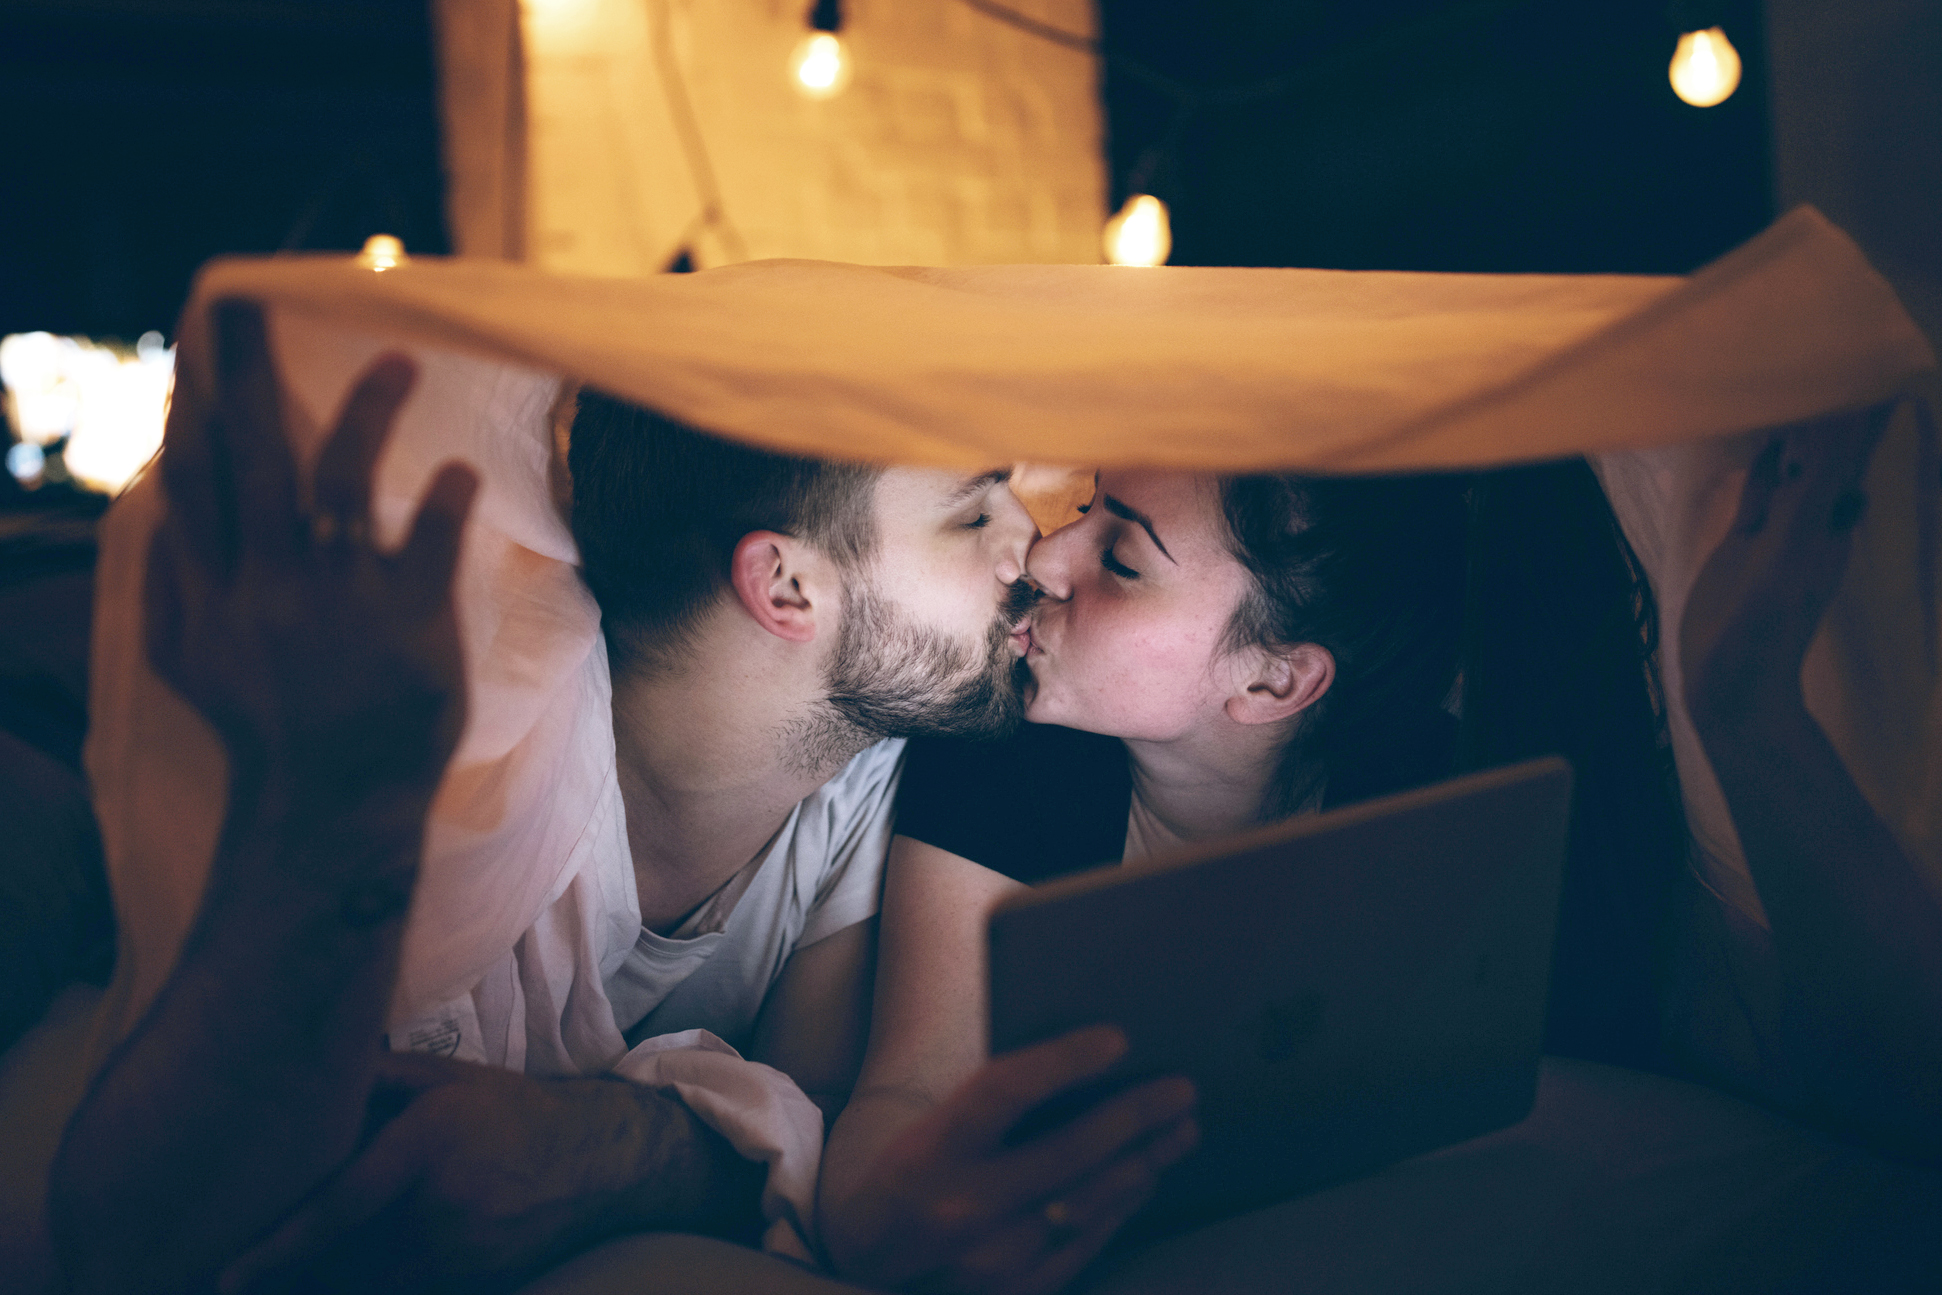 allysa pratt recommends pictures of couples in bed pic